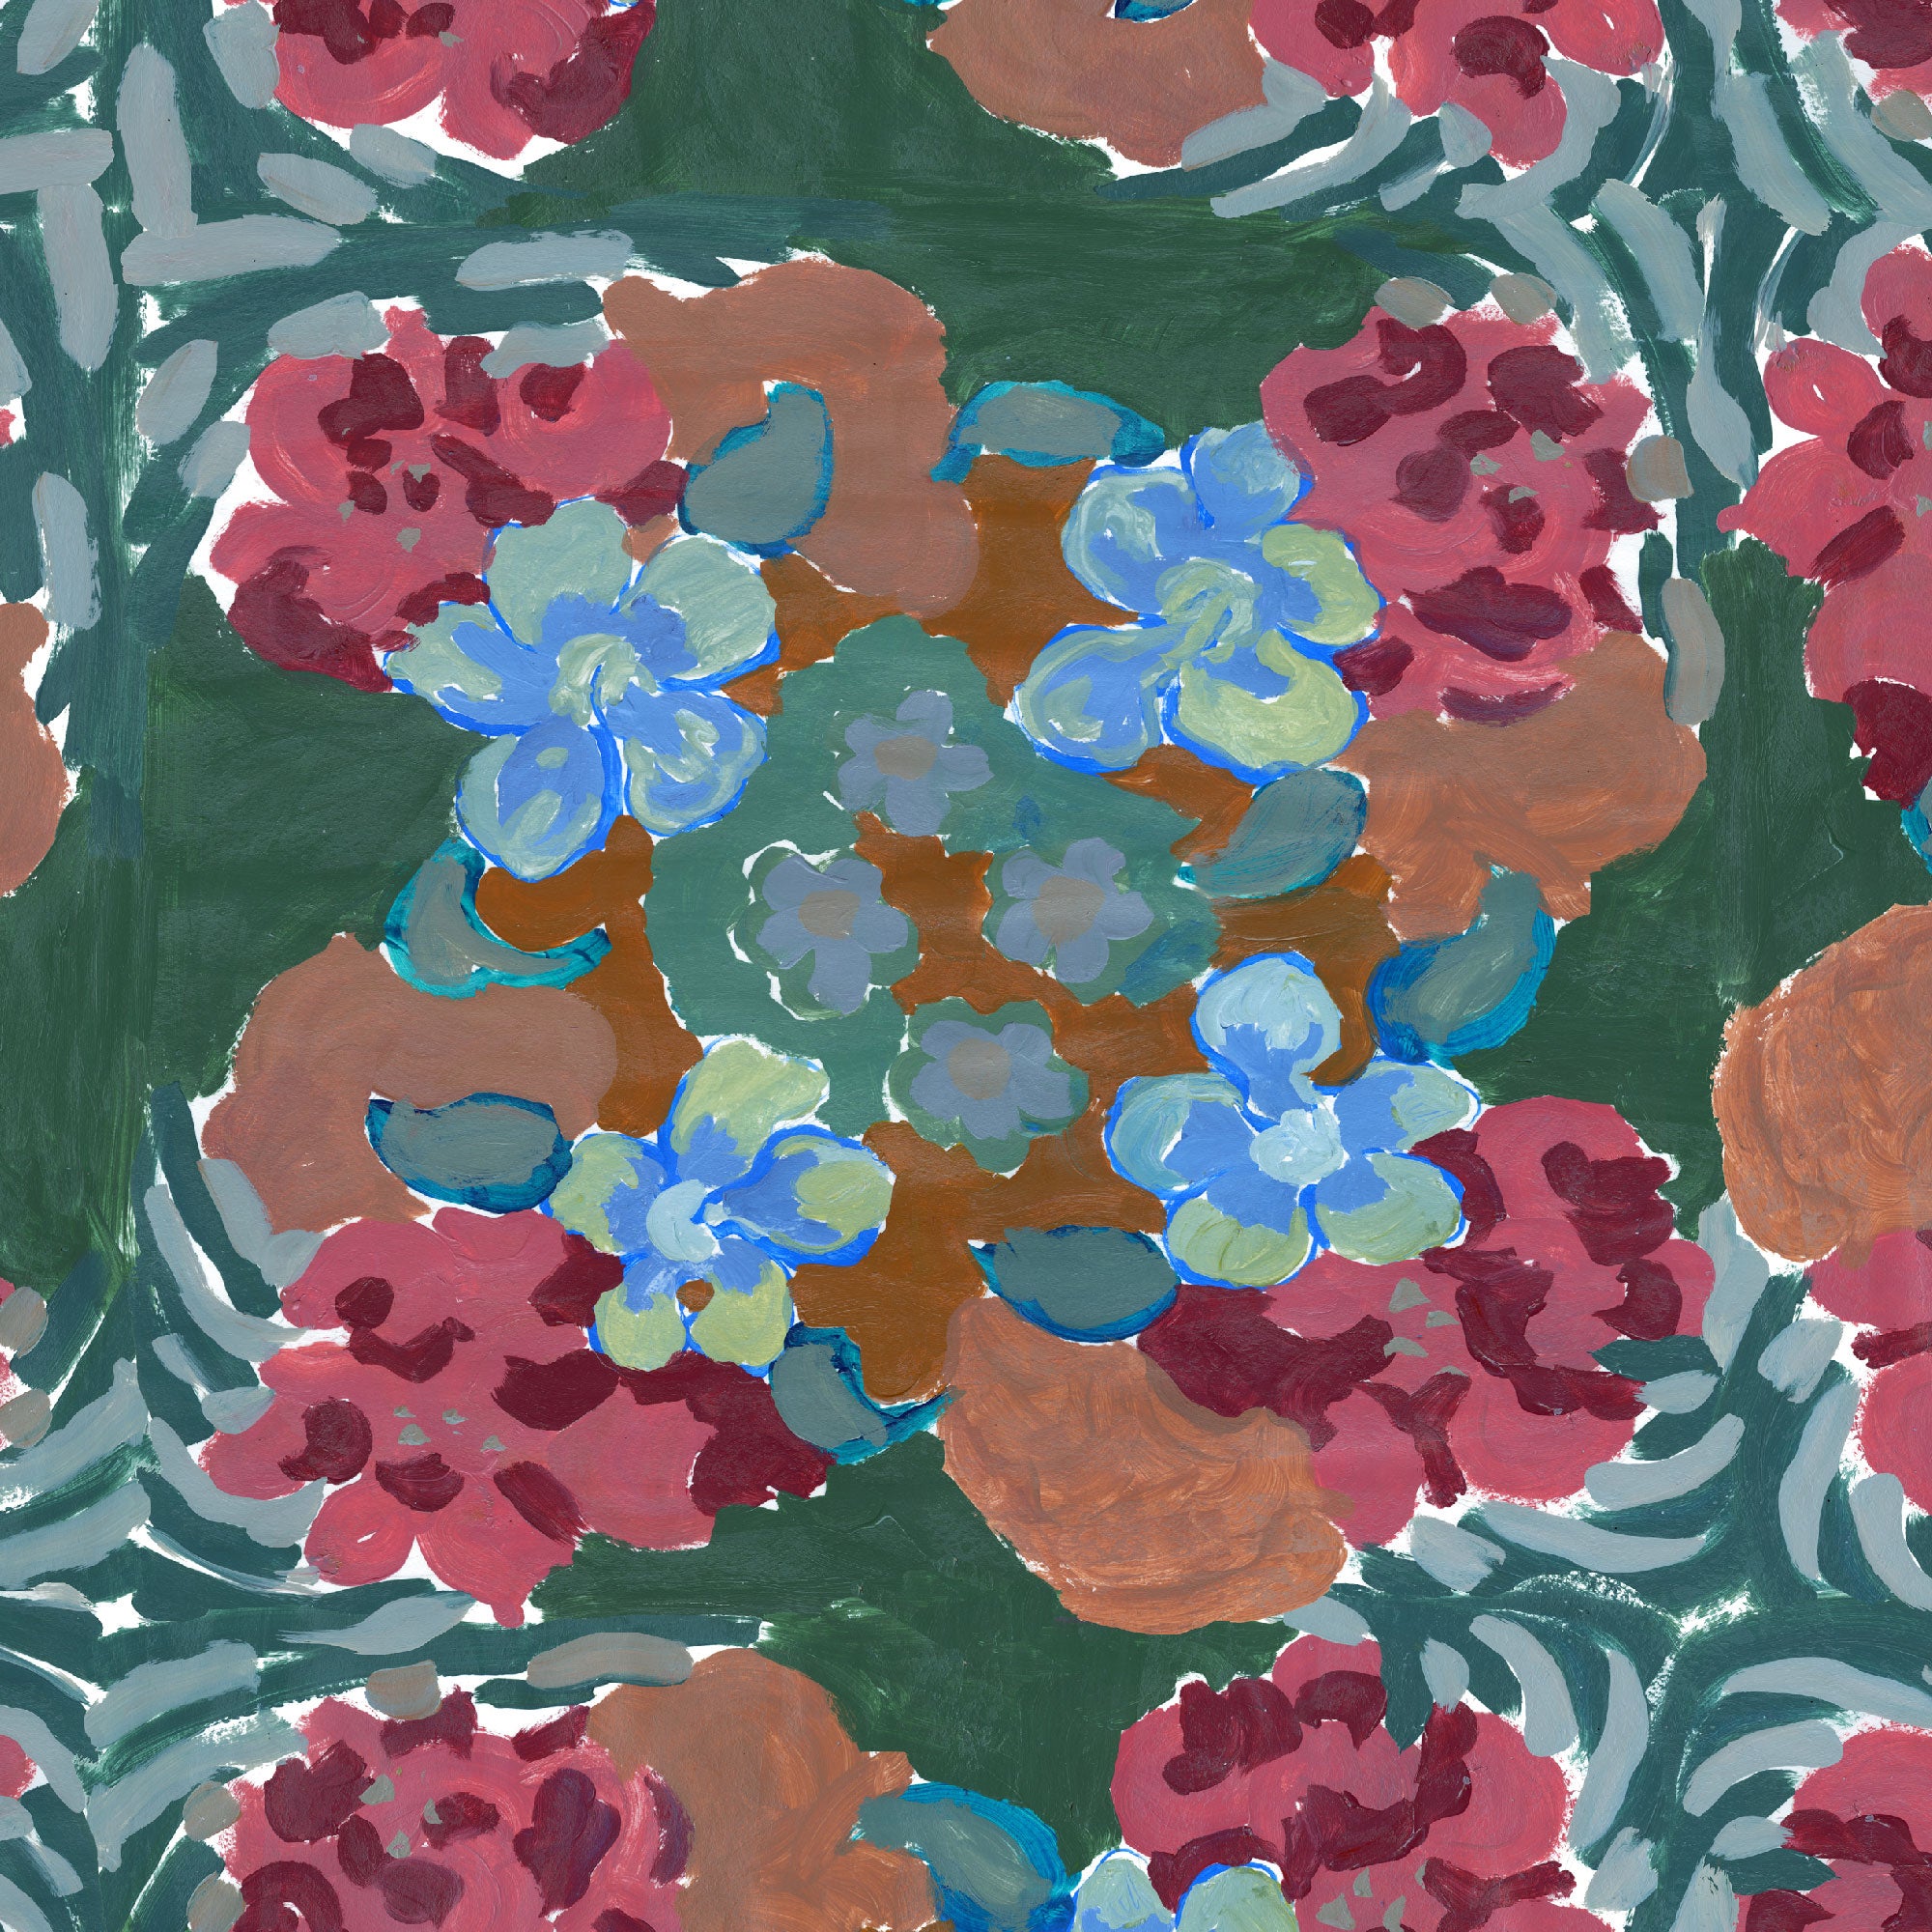 Repeating floral pattern with a paint-daubed texture in shades of green, turquoise and maroon.